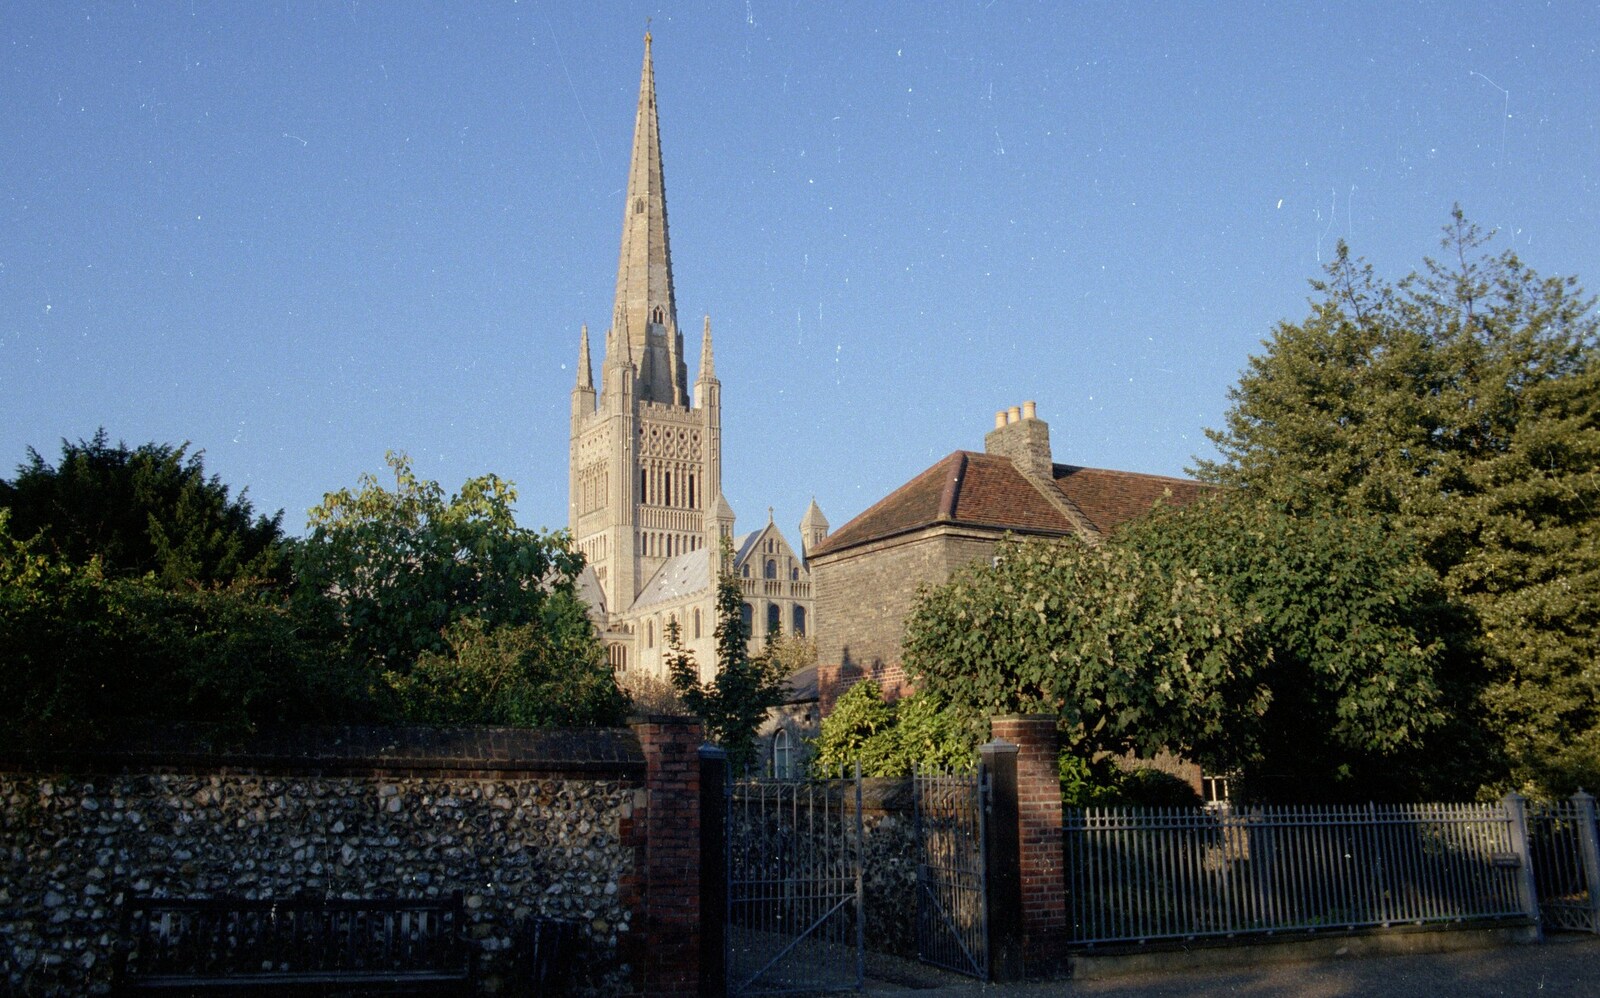 Sewell's Cottage Garden Telly, Red House, Norfolk - 14th May 1988: A view of Norwich Cathedral from the close